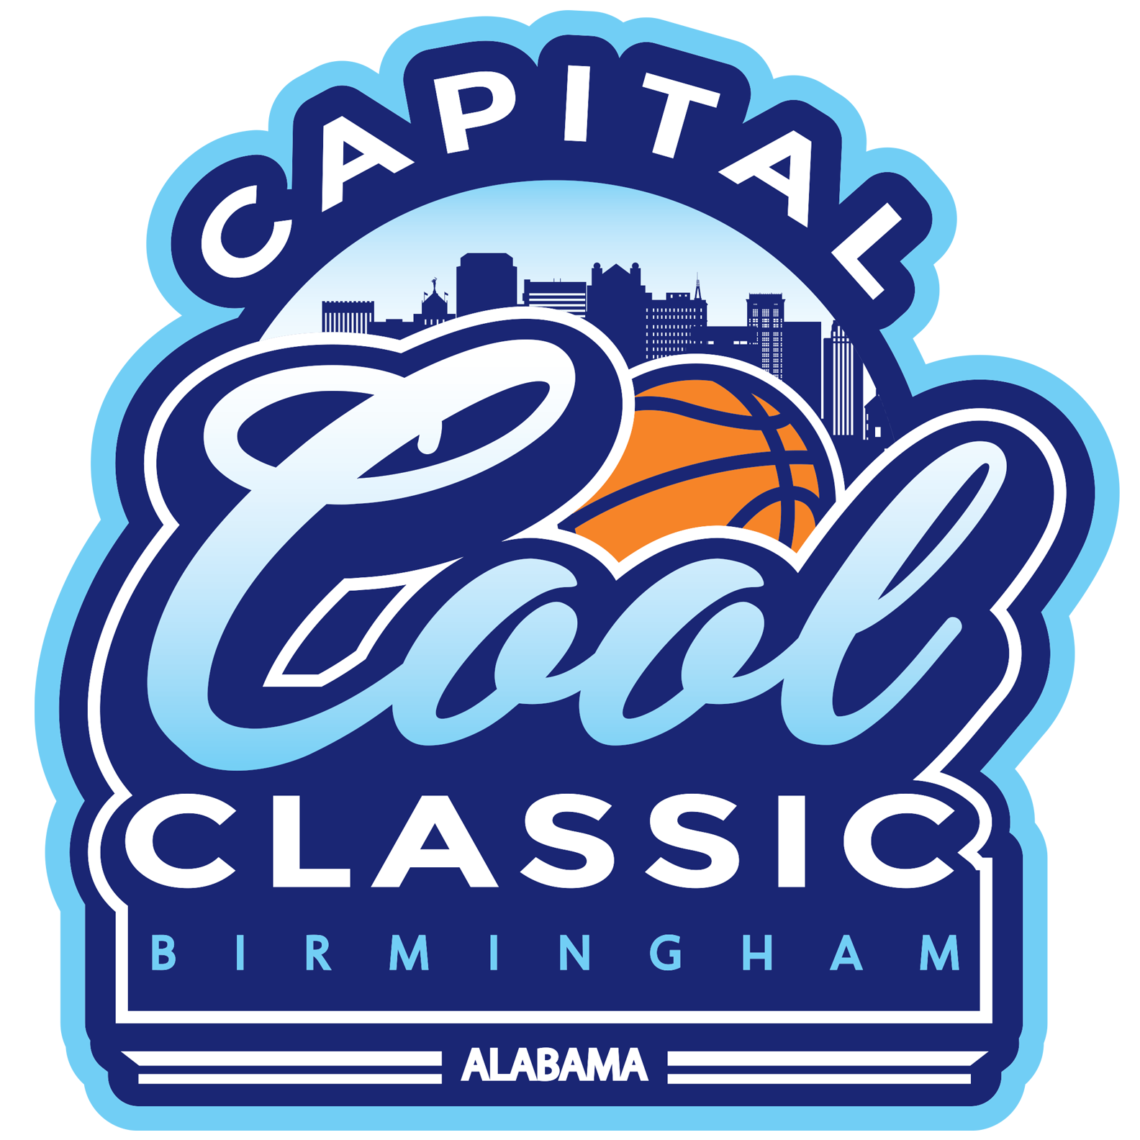 Capital Cool Classic AllTournament Teams Who Were The Best Players